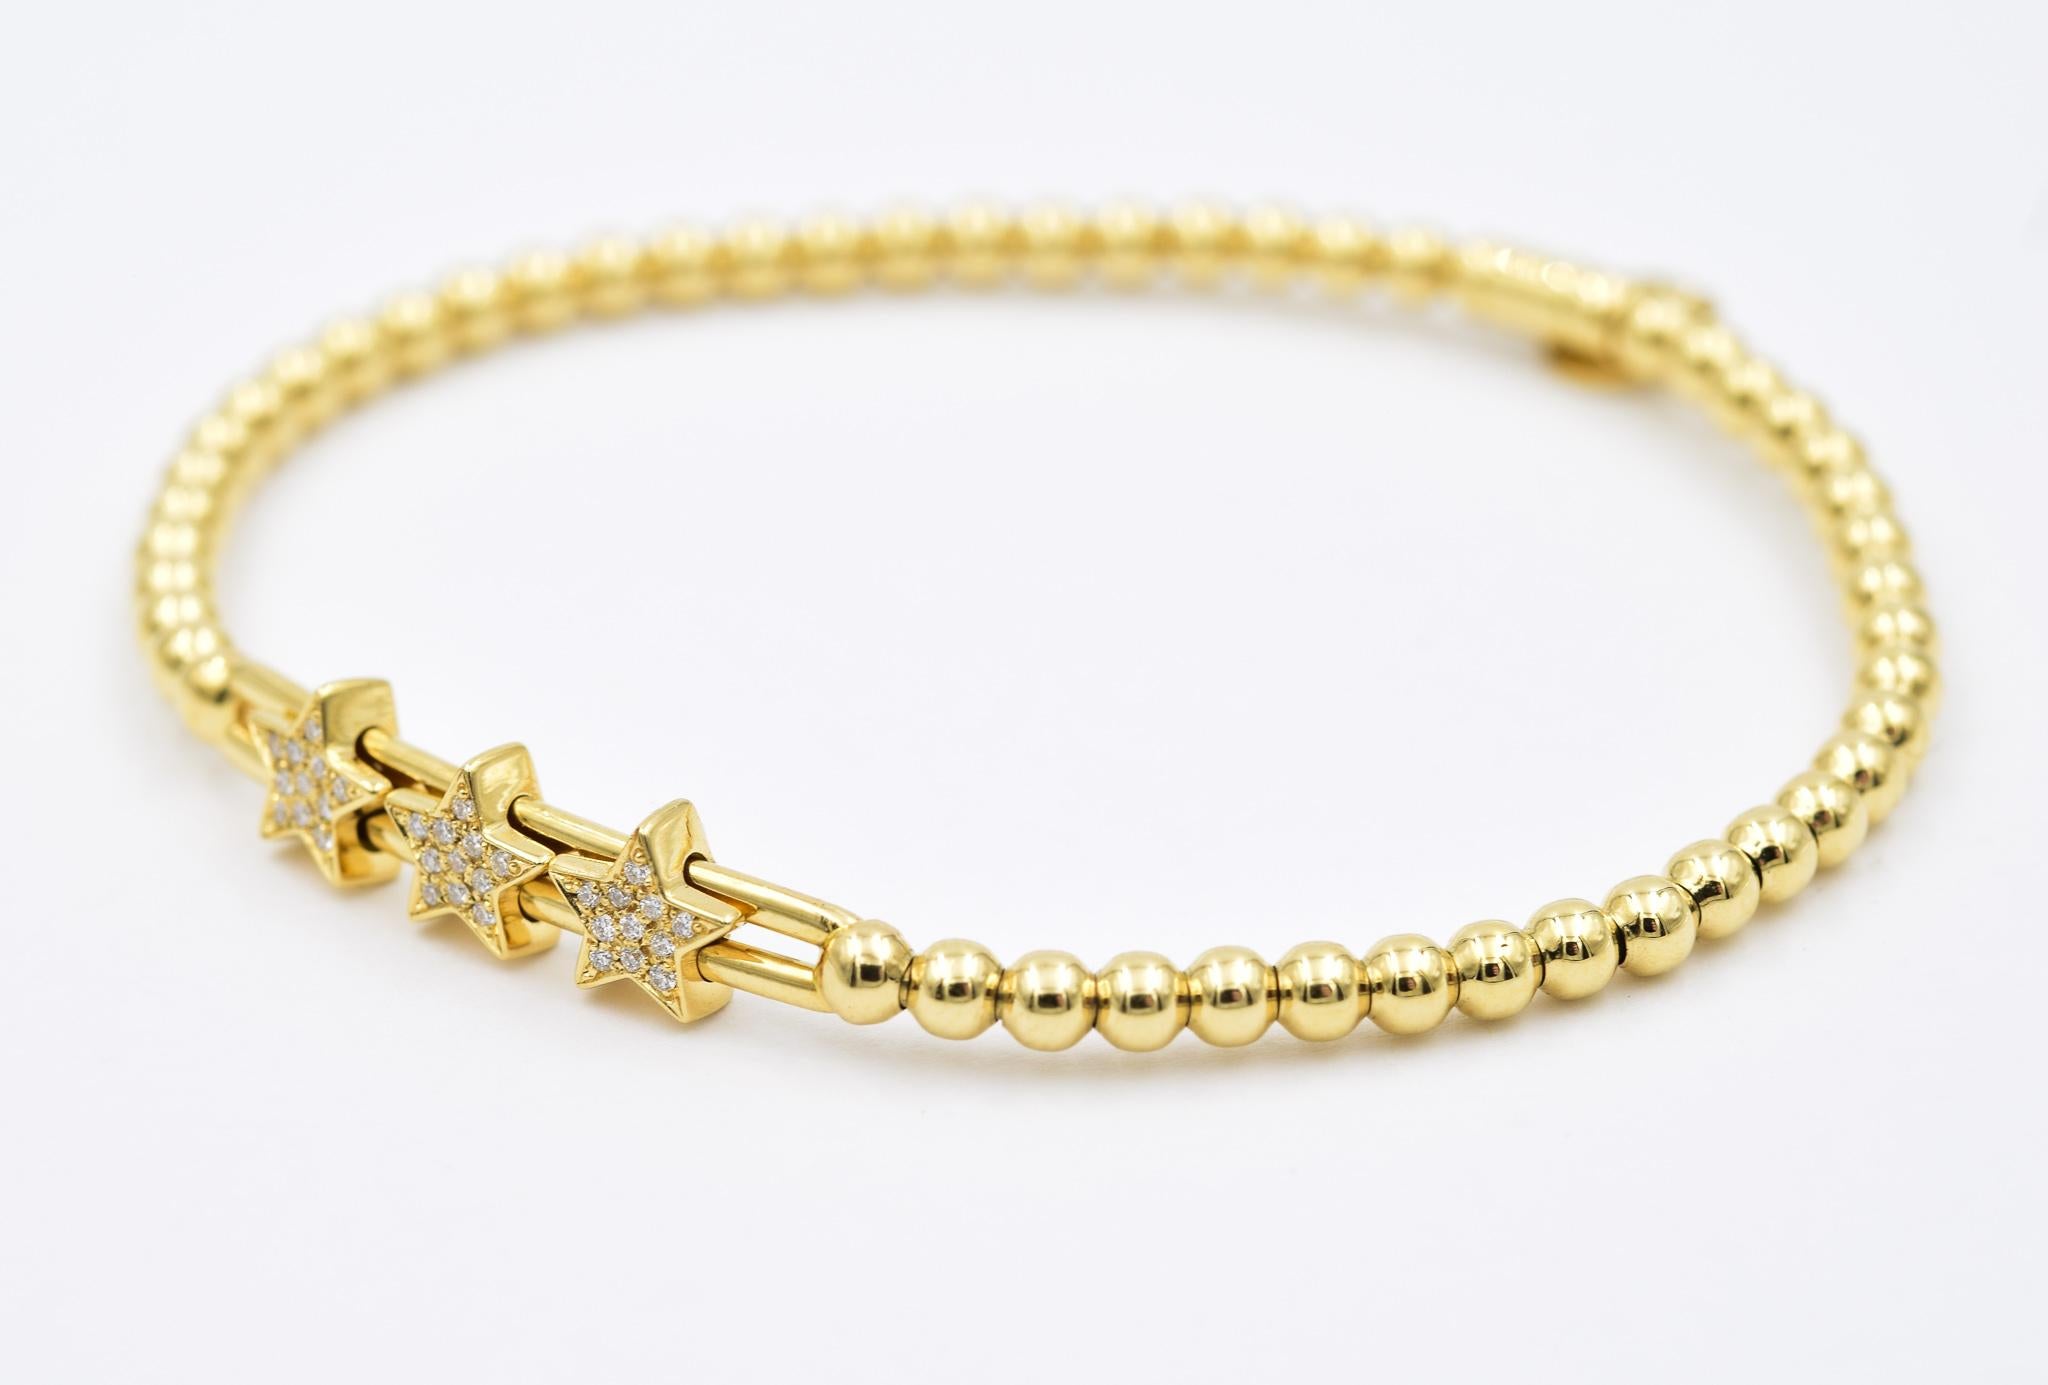 Hulchi Belluni diamond triple star stretchable bracelet from the Tresore Collection in 18k yellow gold set with high quality white diamonds. Also available in White Gold.

0.10ctw of Diamonds 
Beaded & stretchable for extra comfort & style